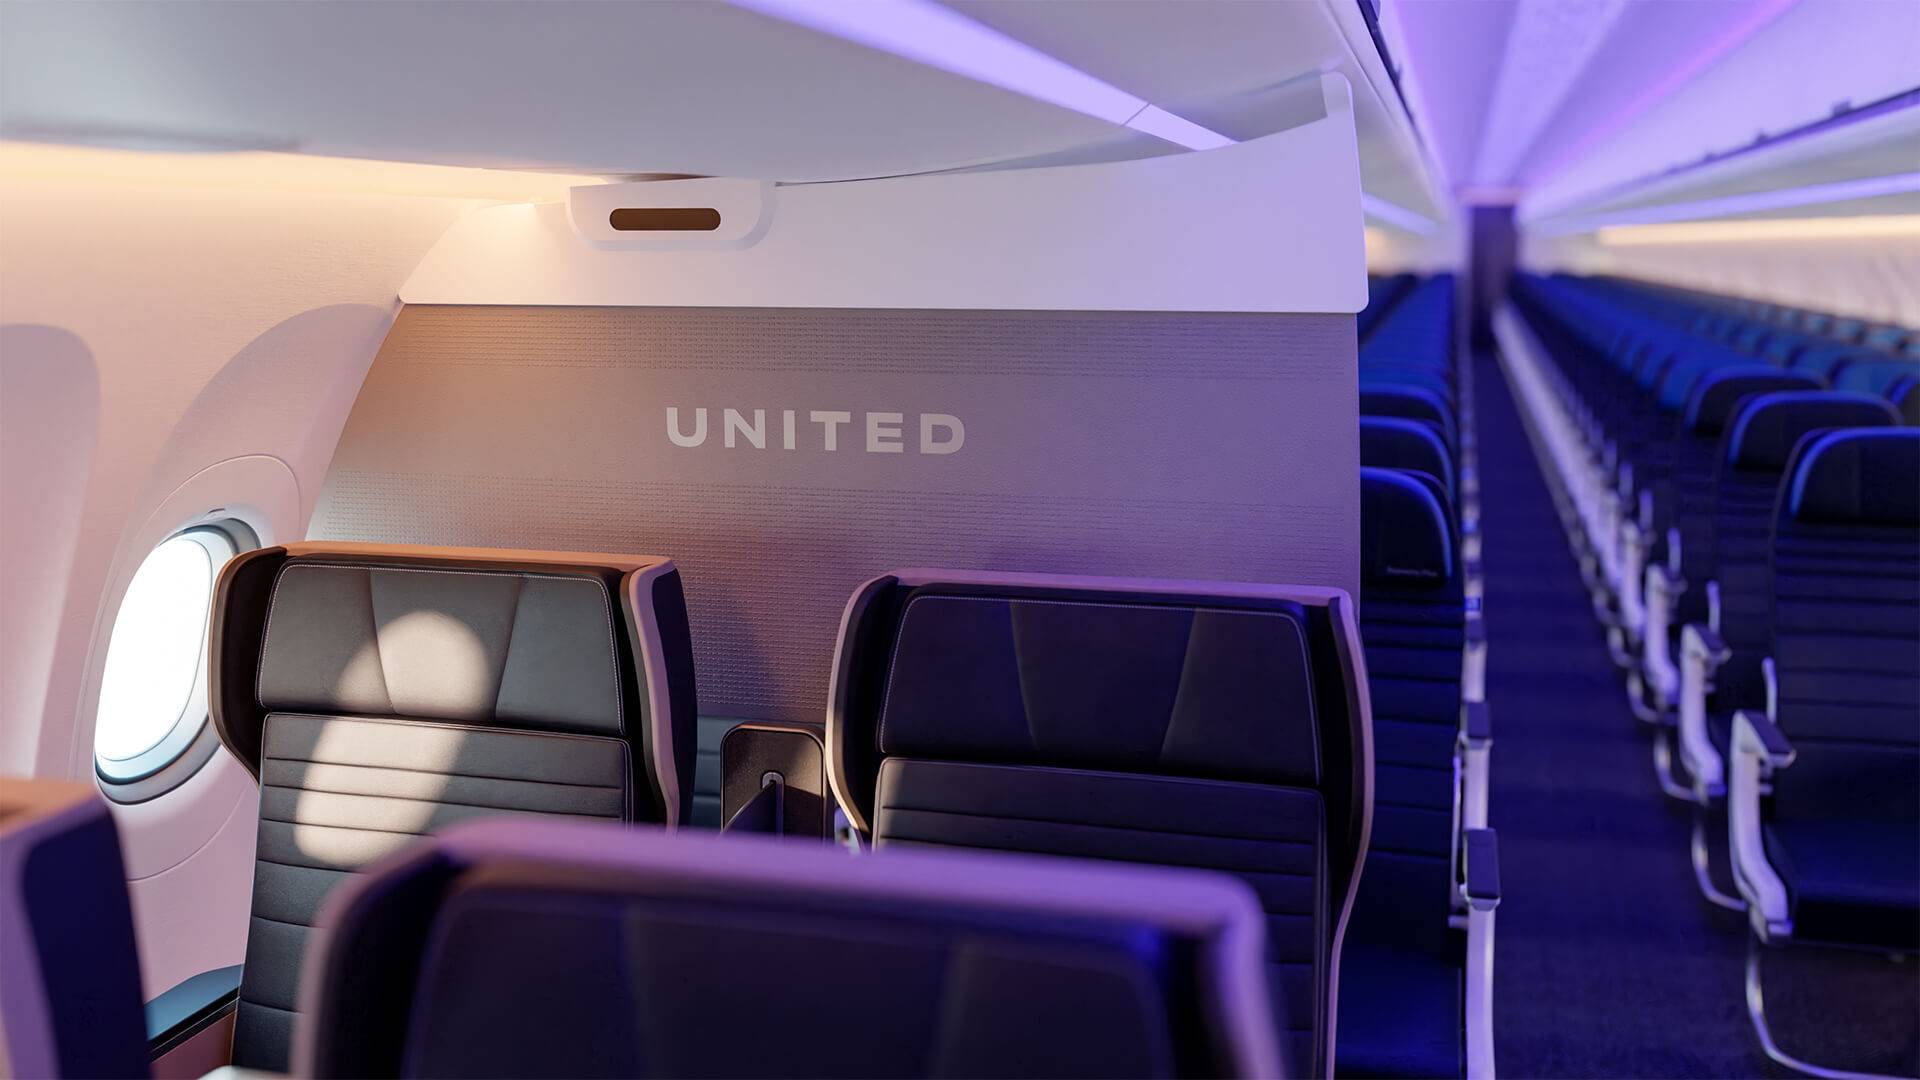 United Airlines A321neo cabin interior